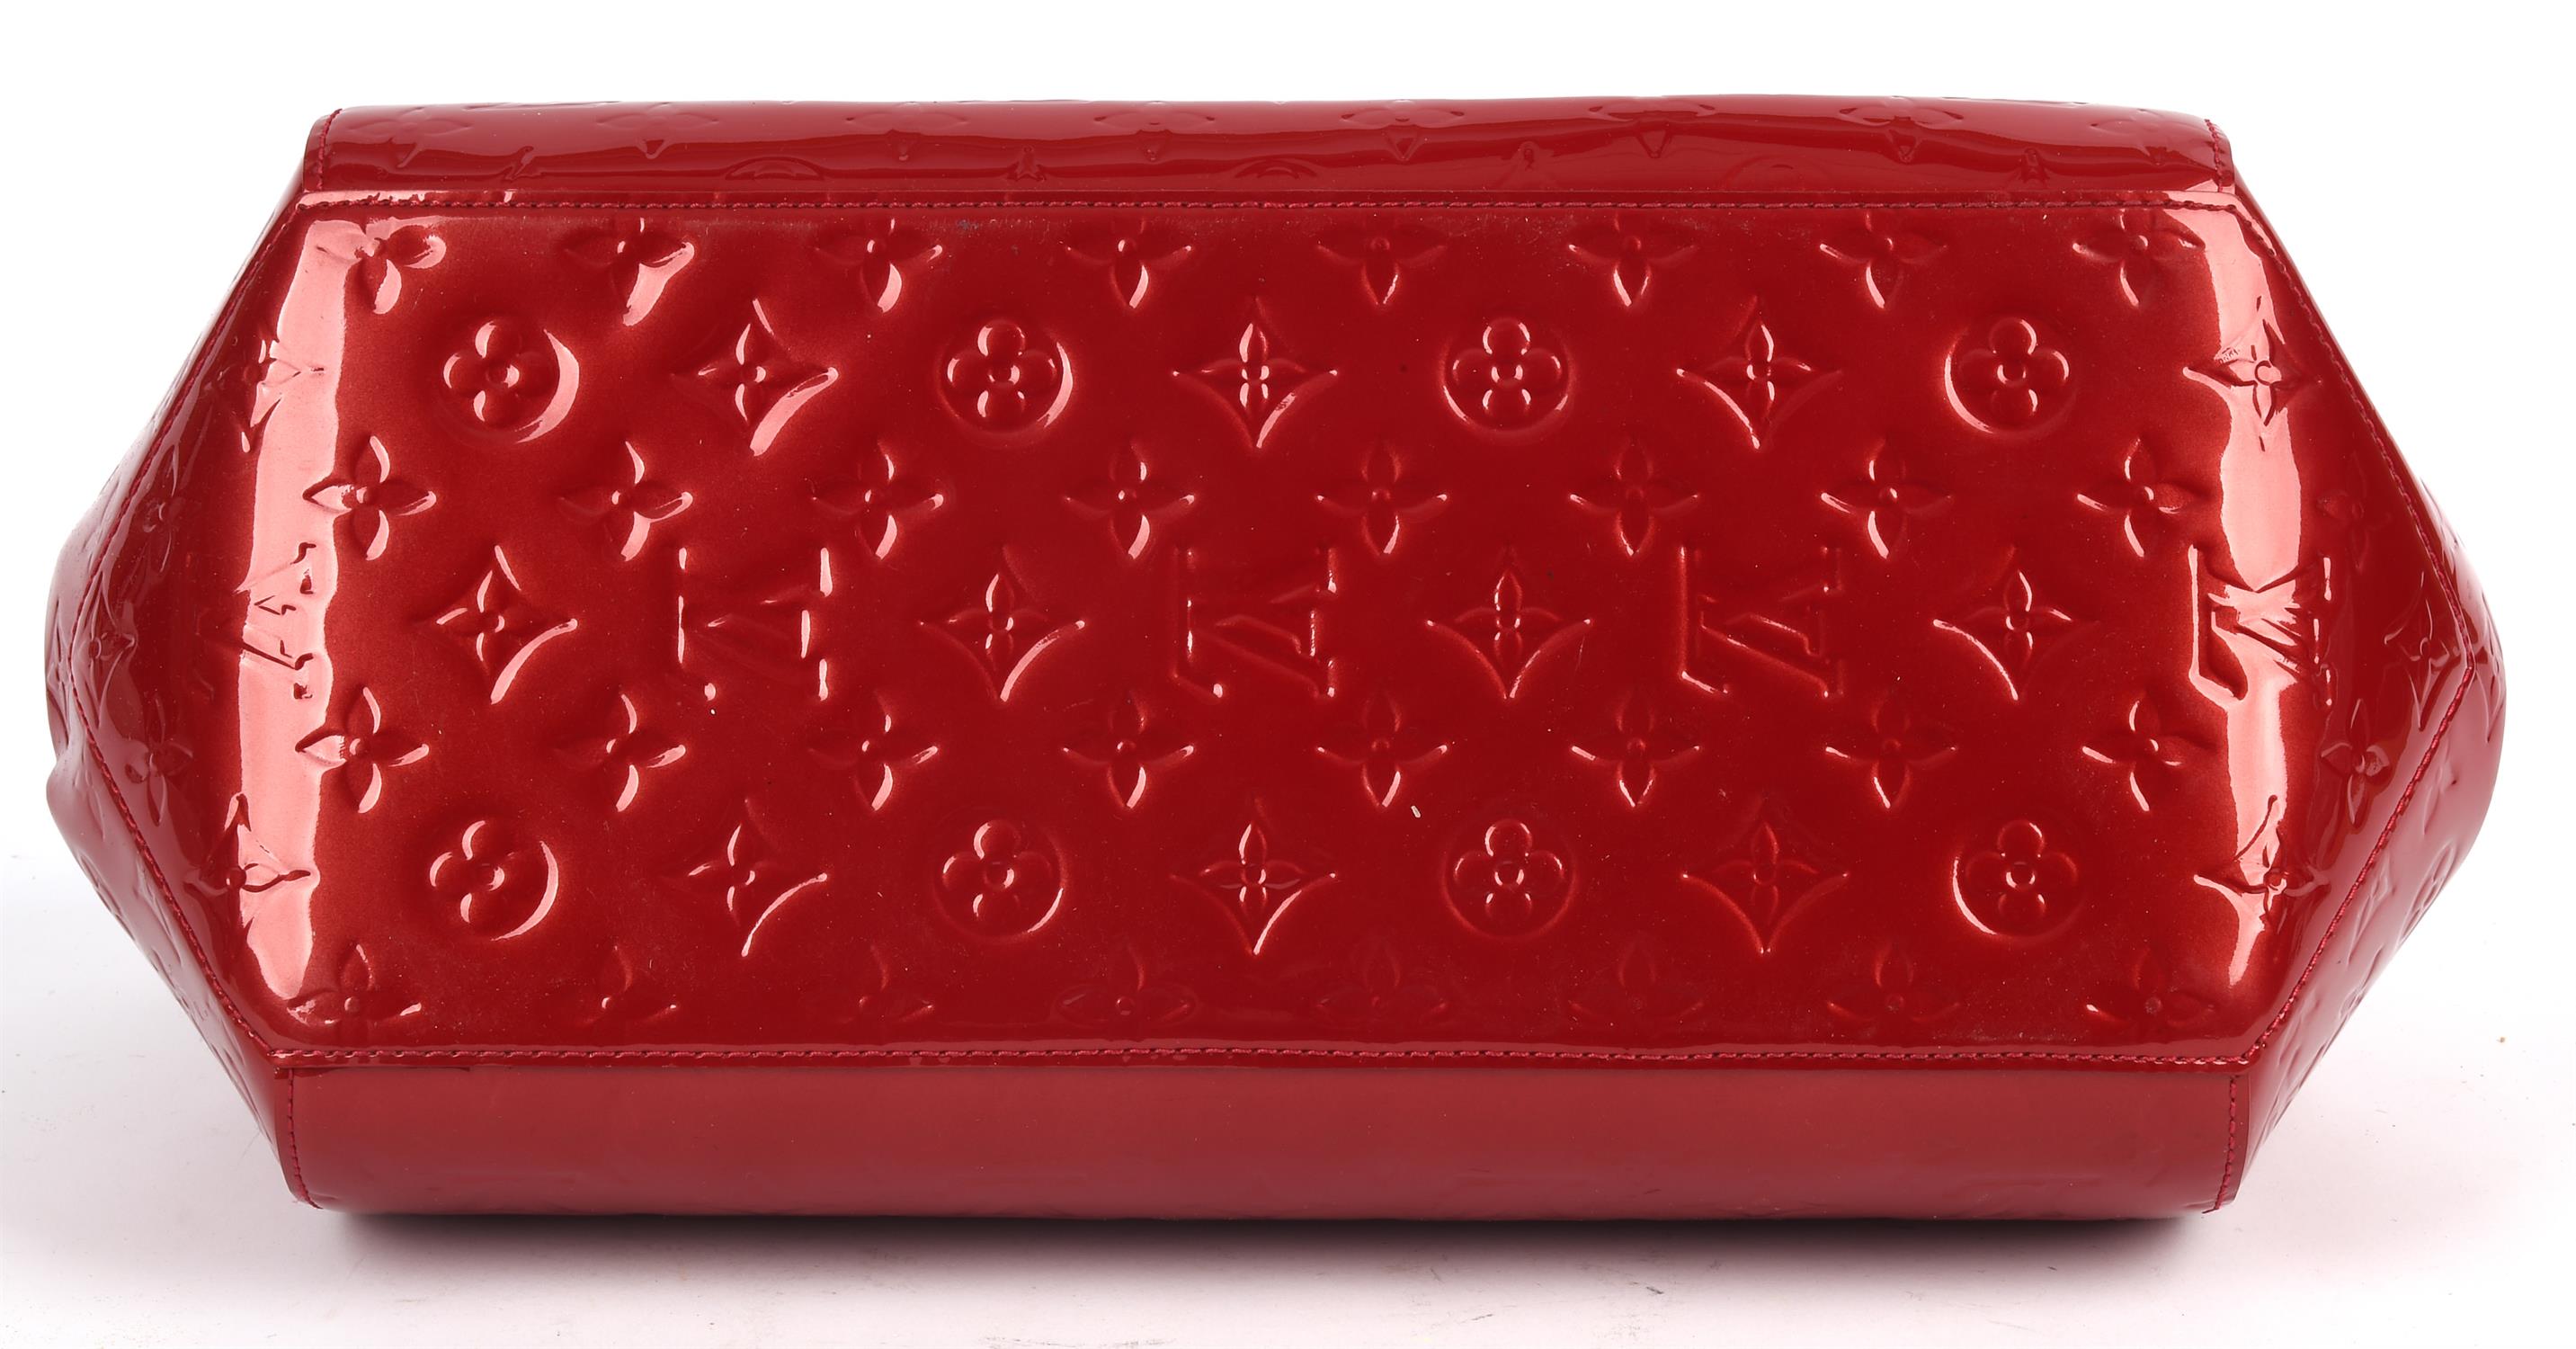 LOUIS VUITTON lipstick red Vernis varnished leather French Montana handbag with gold coloured - Image 7 of 8